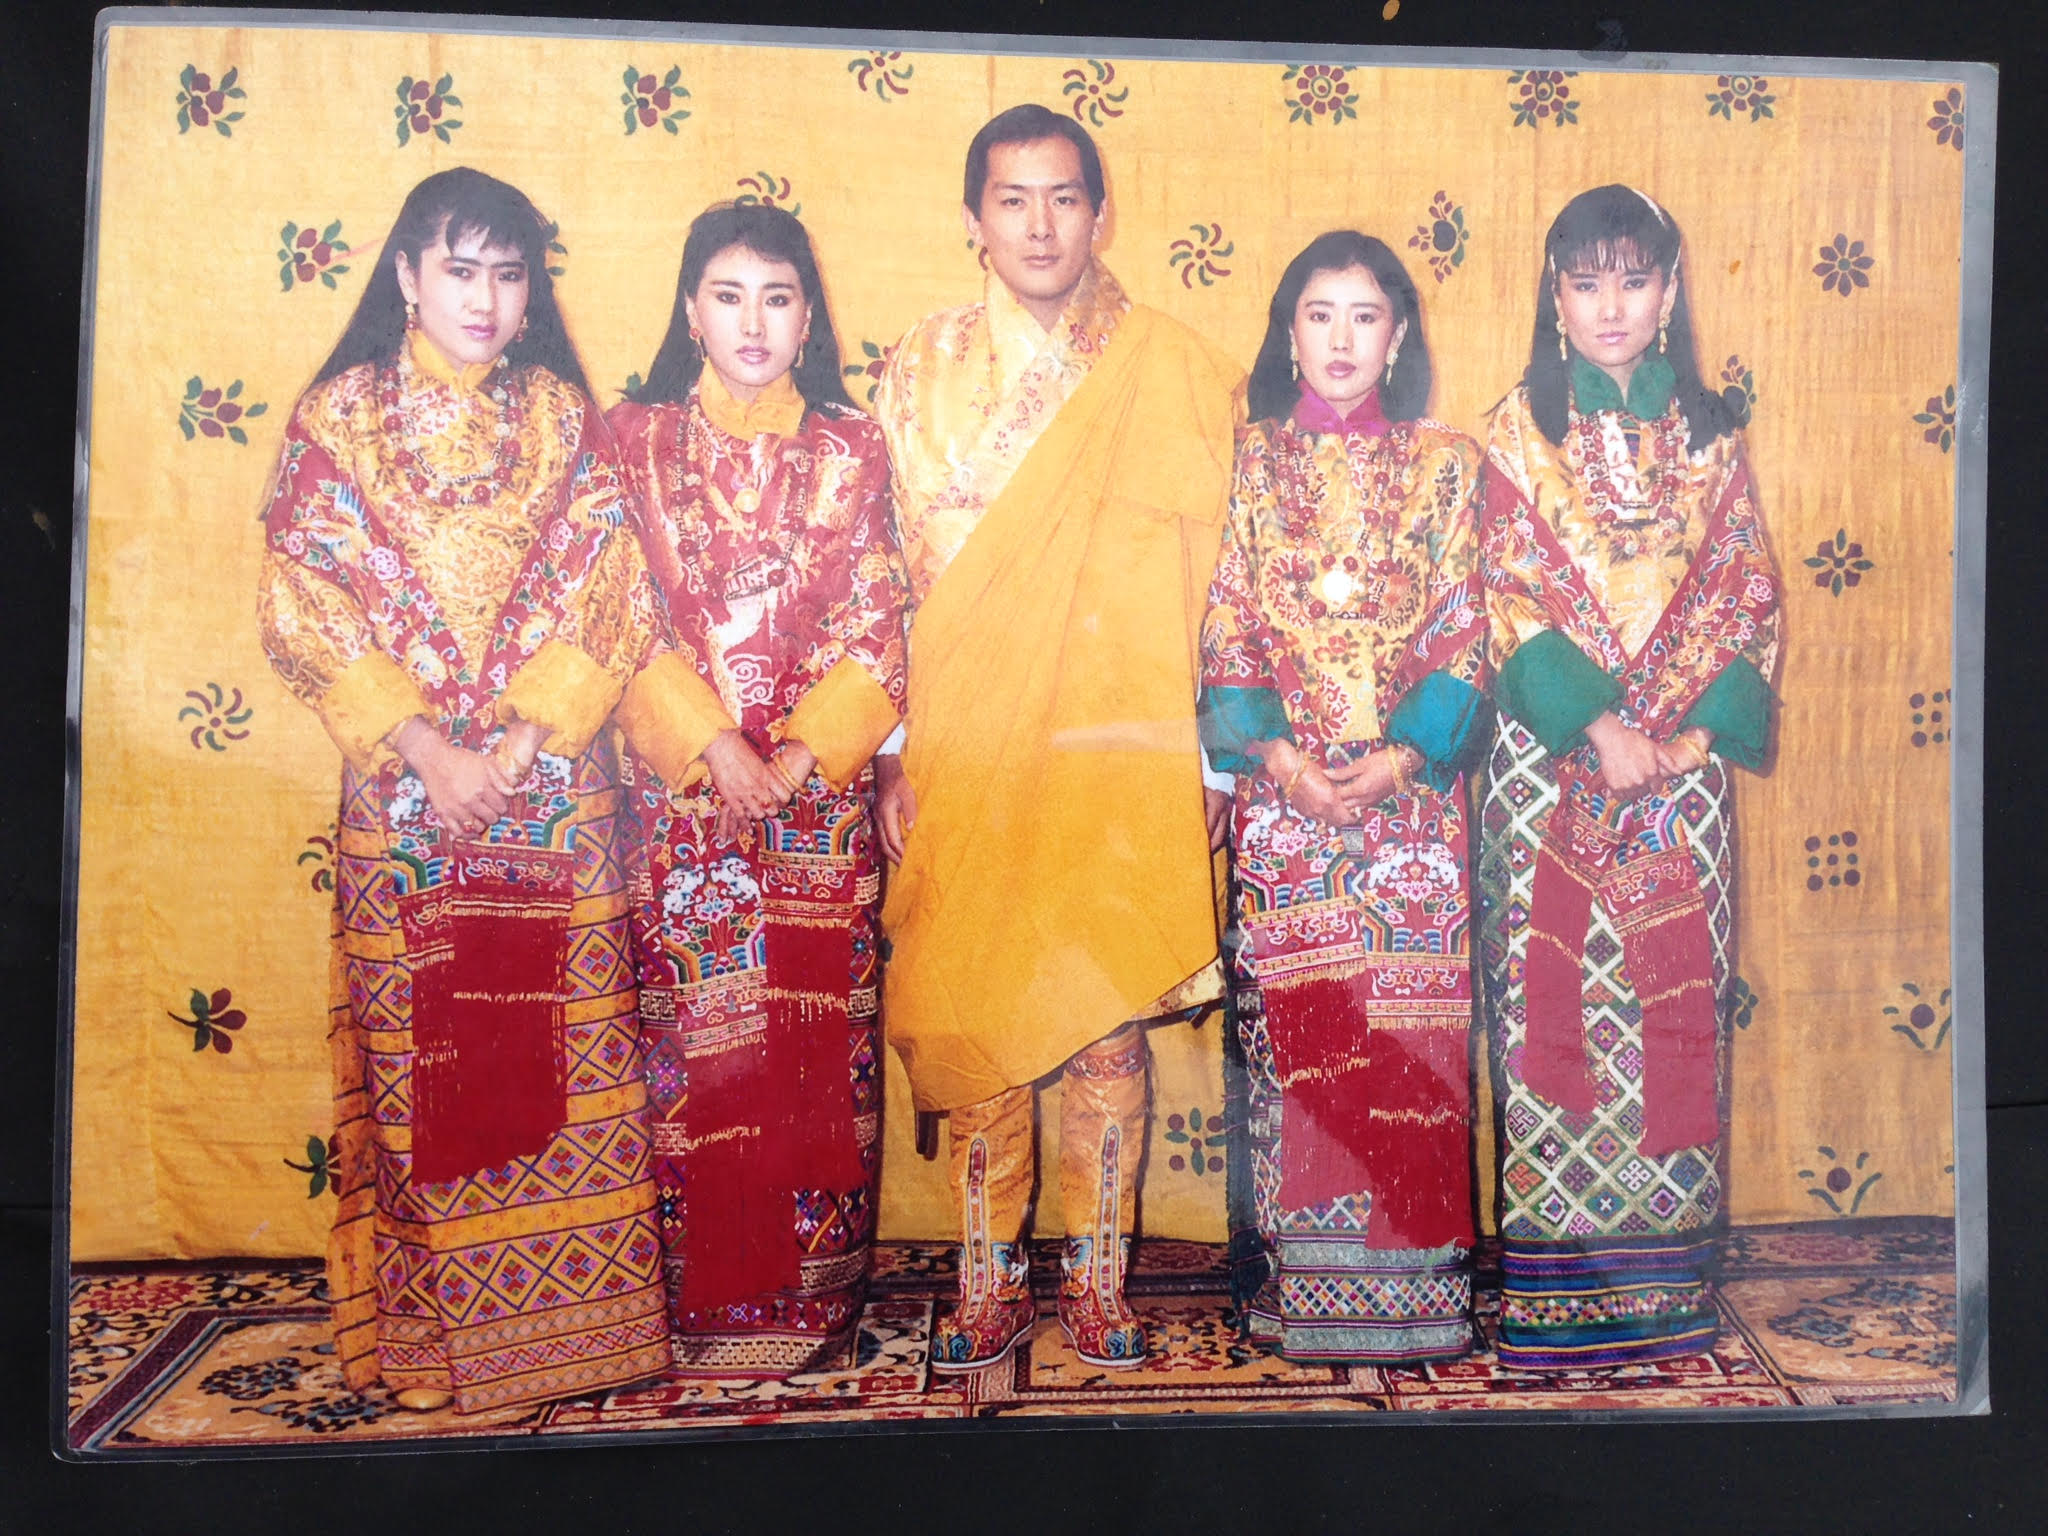 The retired king of Bhutan with his four wives, all sisters